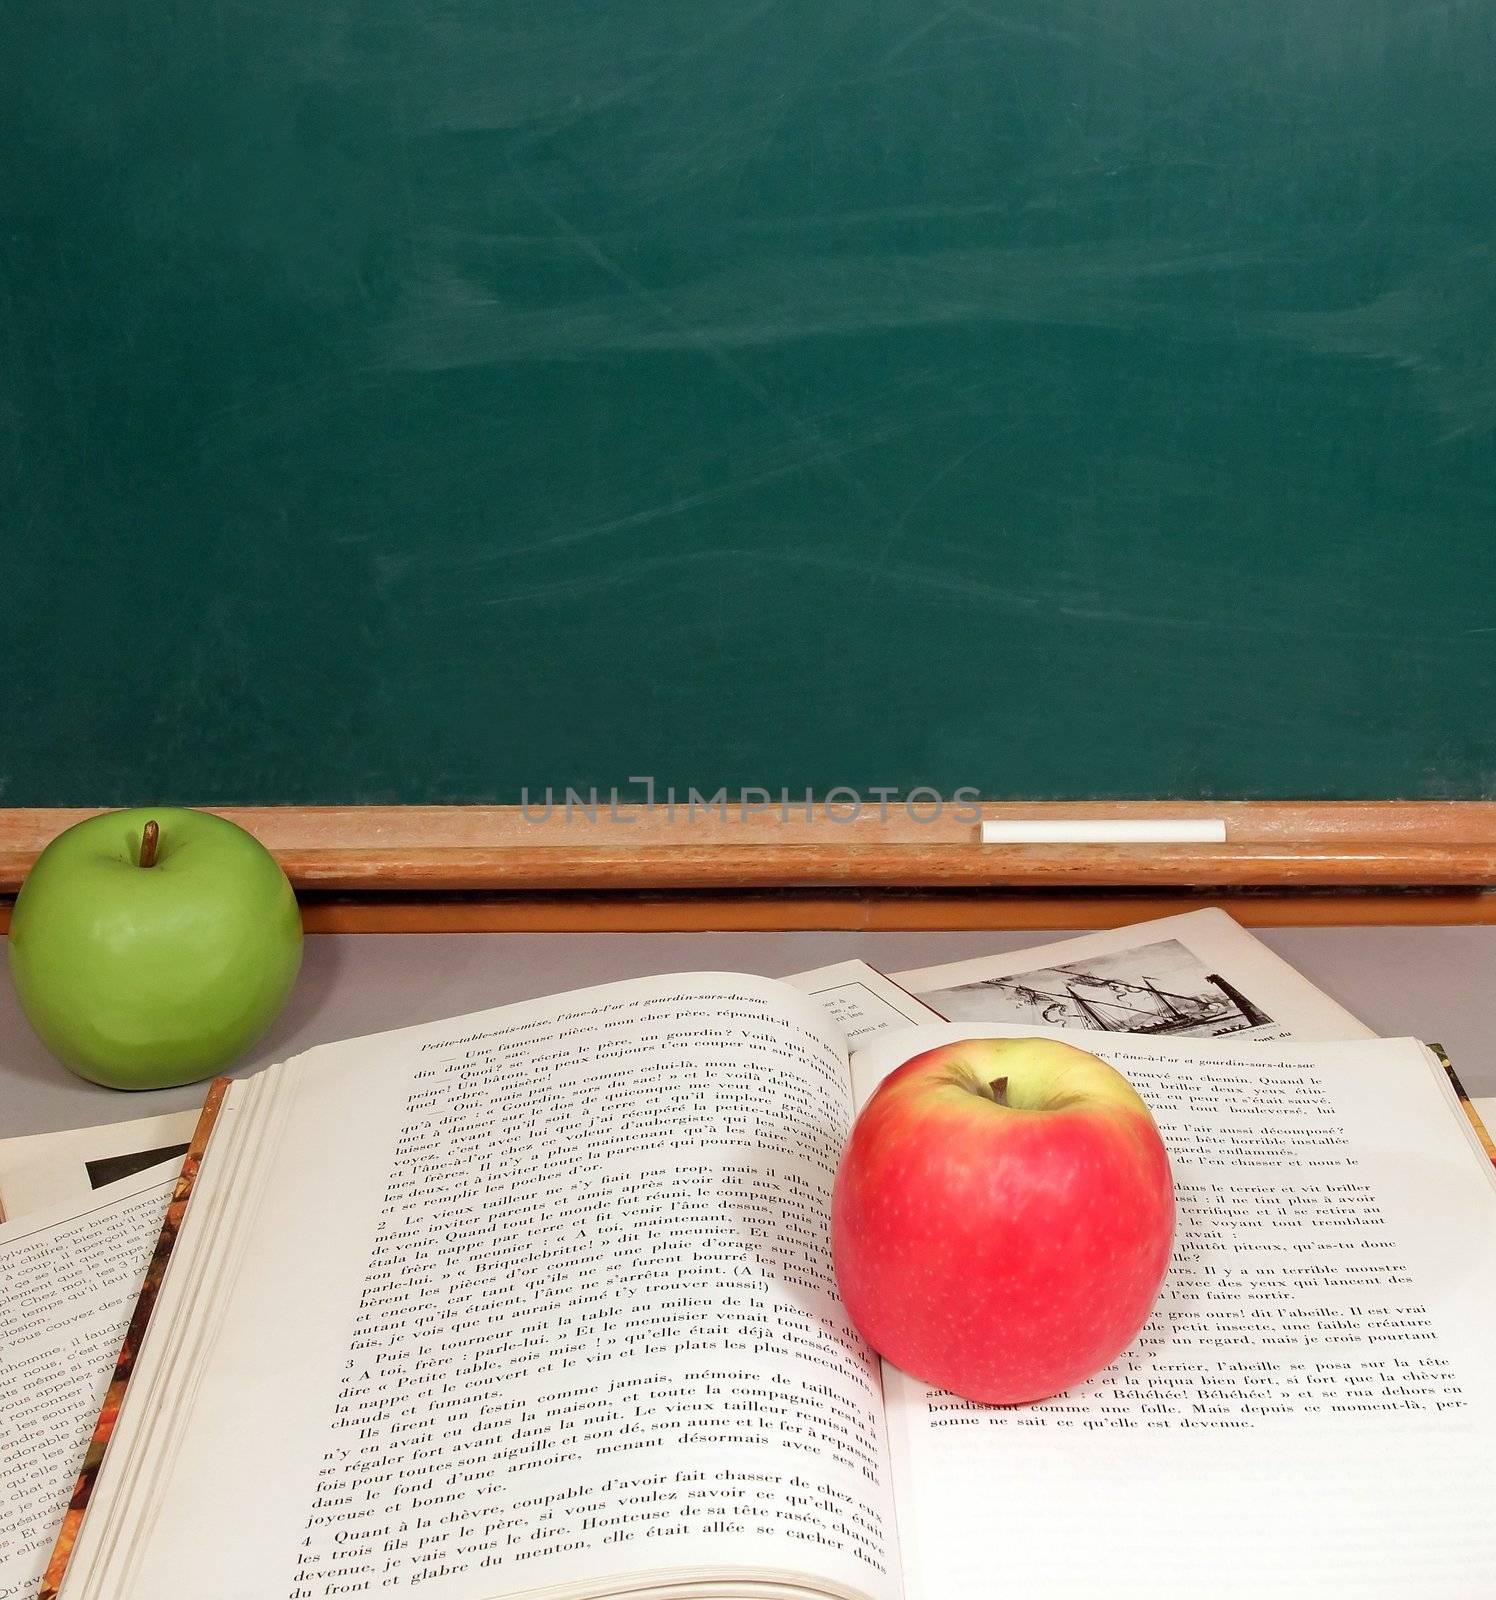 Apples of the knowledge, schoolbooks and blackboard Metaphor  the green apple of the departure will become red at the end of schooling  text  tales of Grimm 19 century